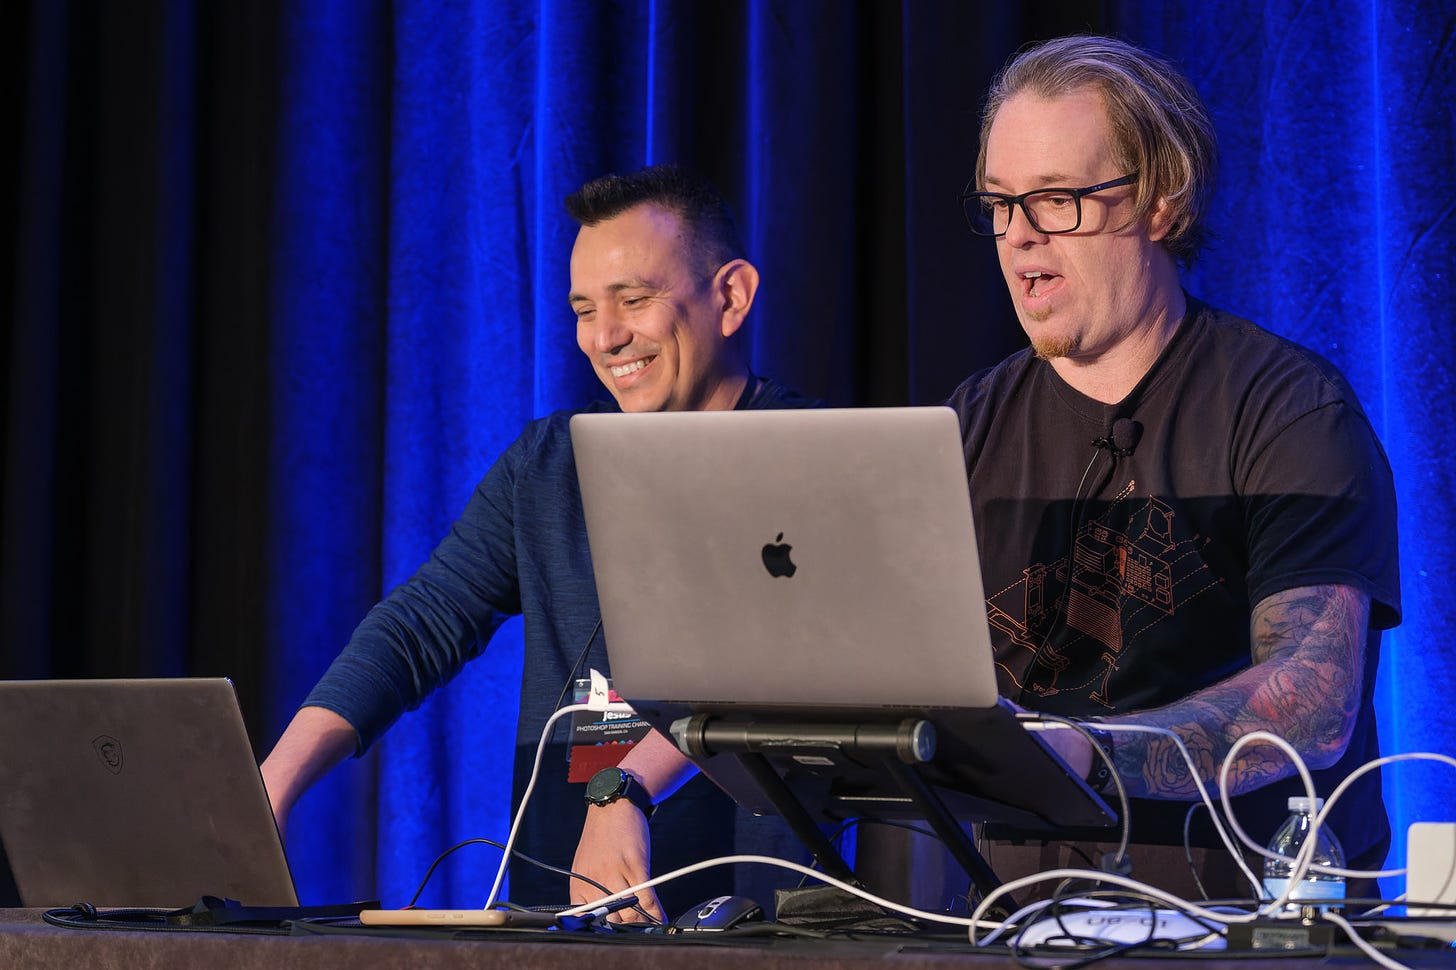 Two men, Jesús Ramirez (left) and Mark Heaps (right) give a presentation using their laptops at CreativePro Week 2022.